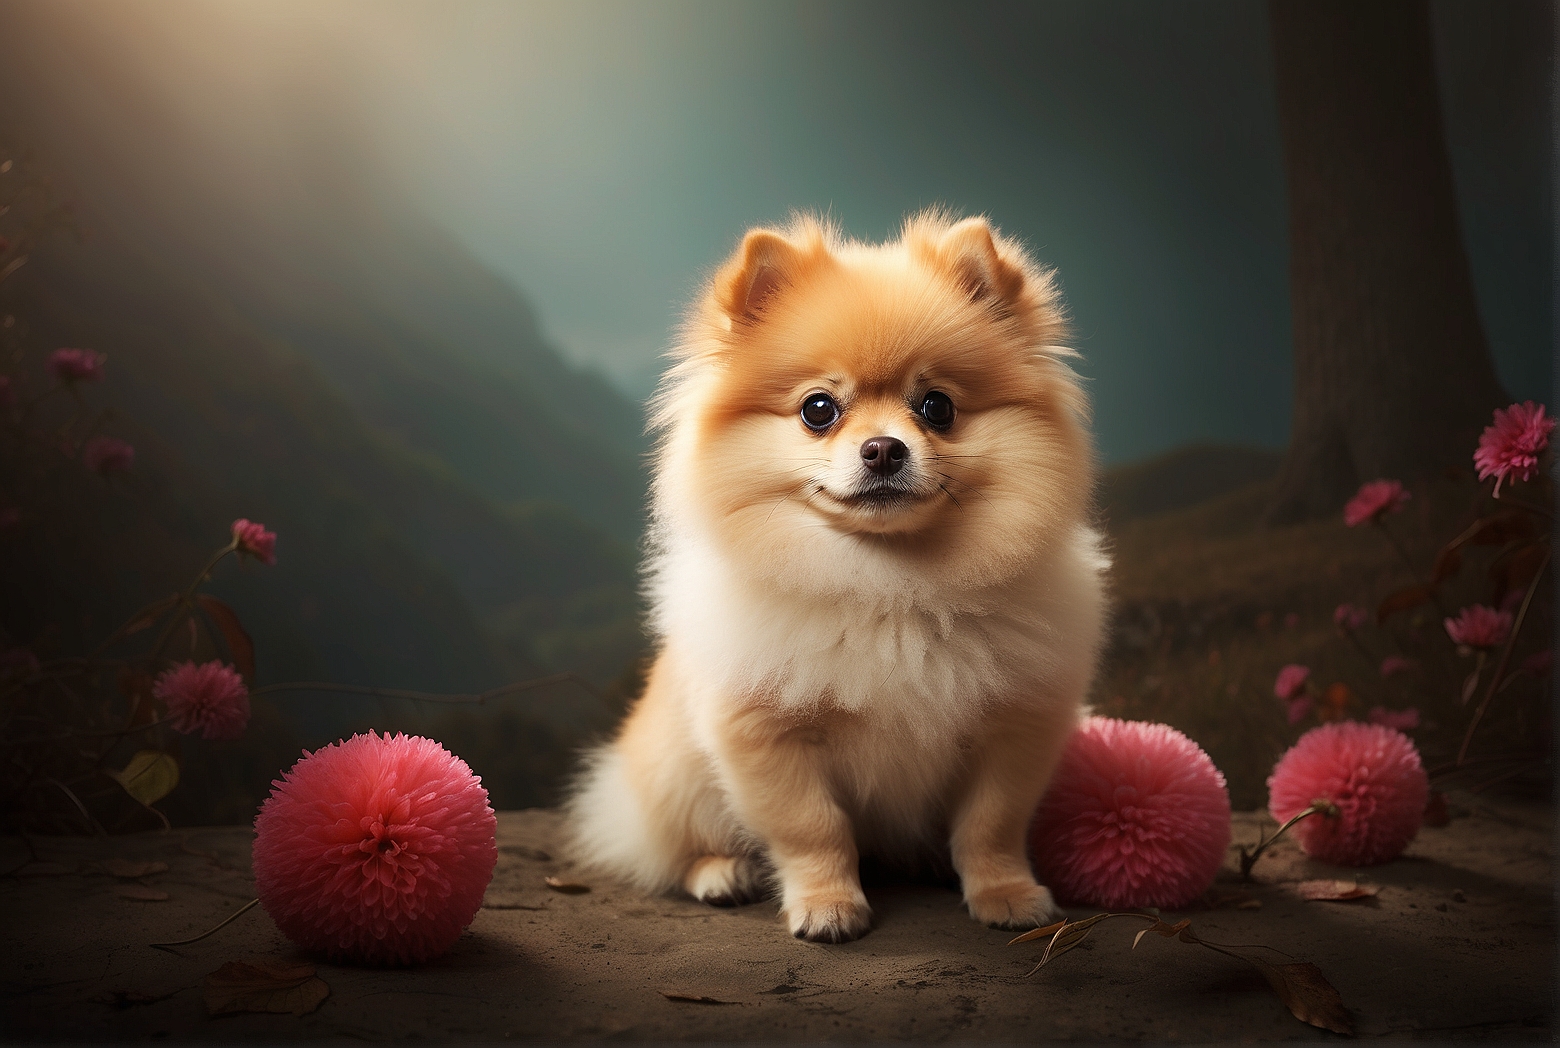 Tips for Caring for a Pomeranian